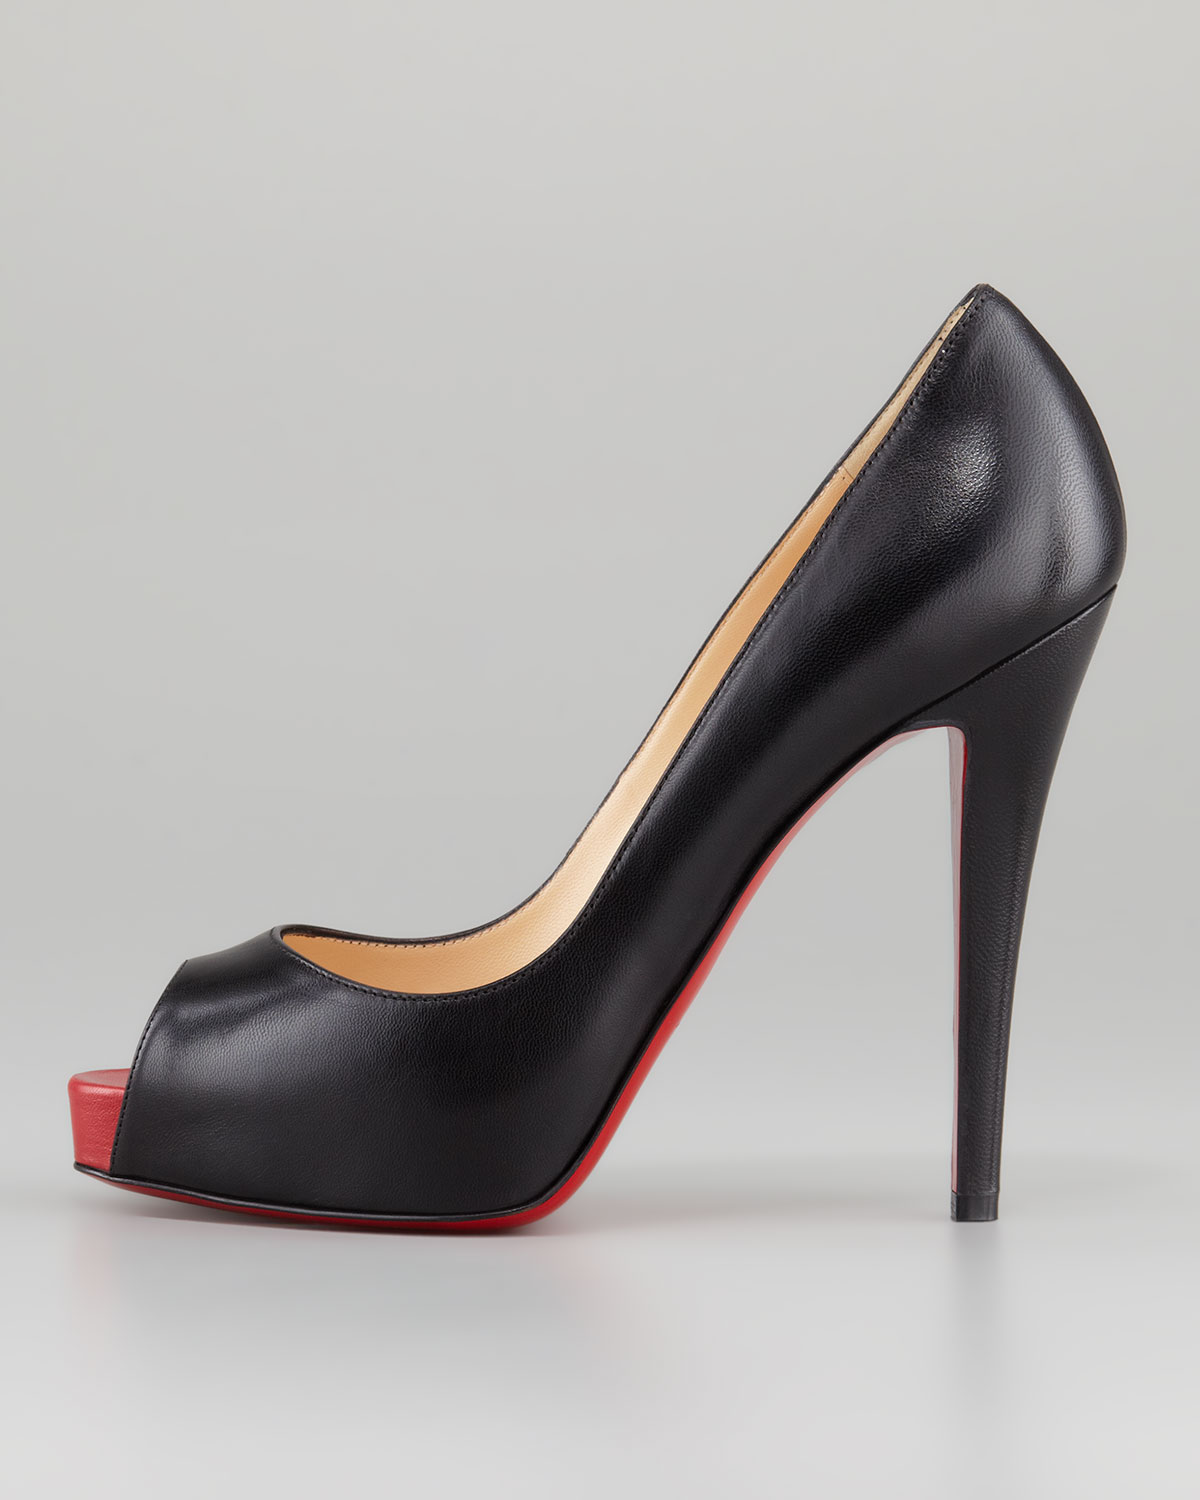 Christian Louboutin Very Prive Leather Platform Red Sole Pump Black in ...